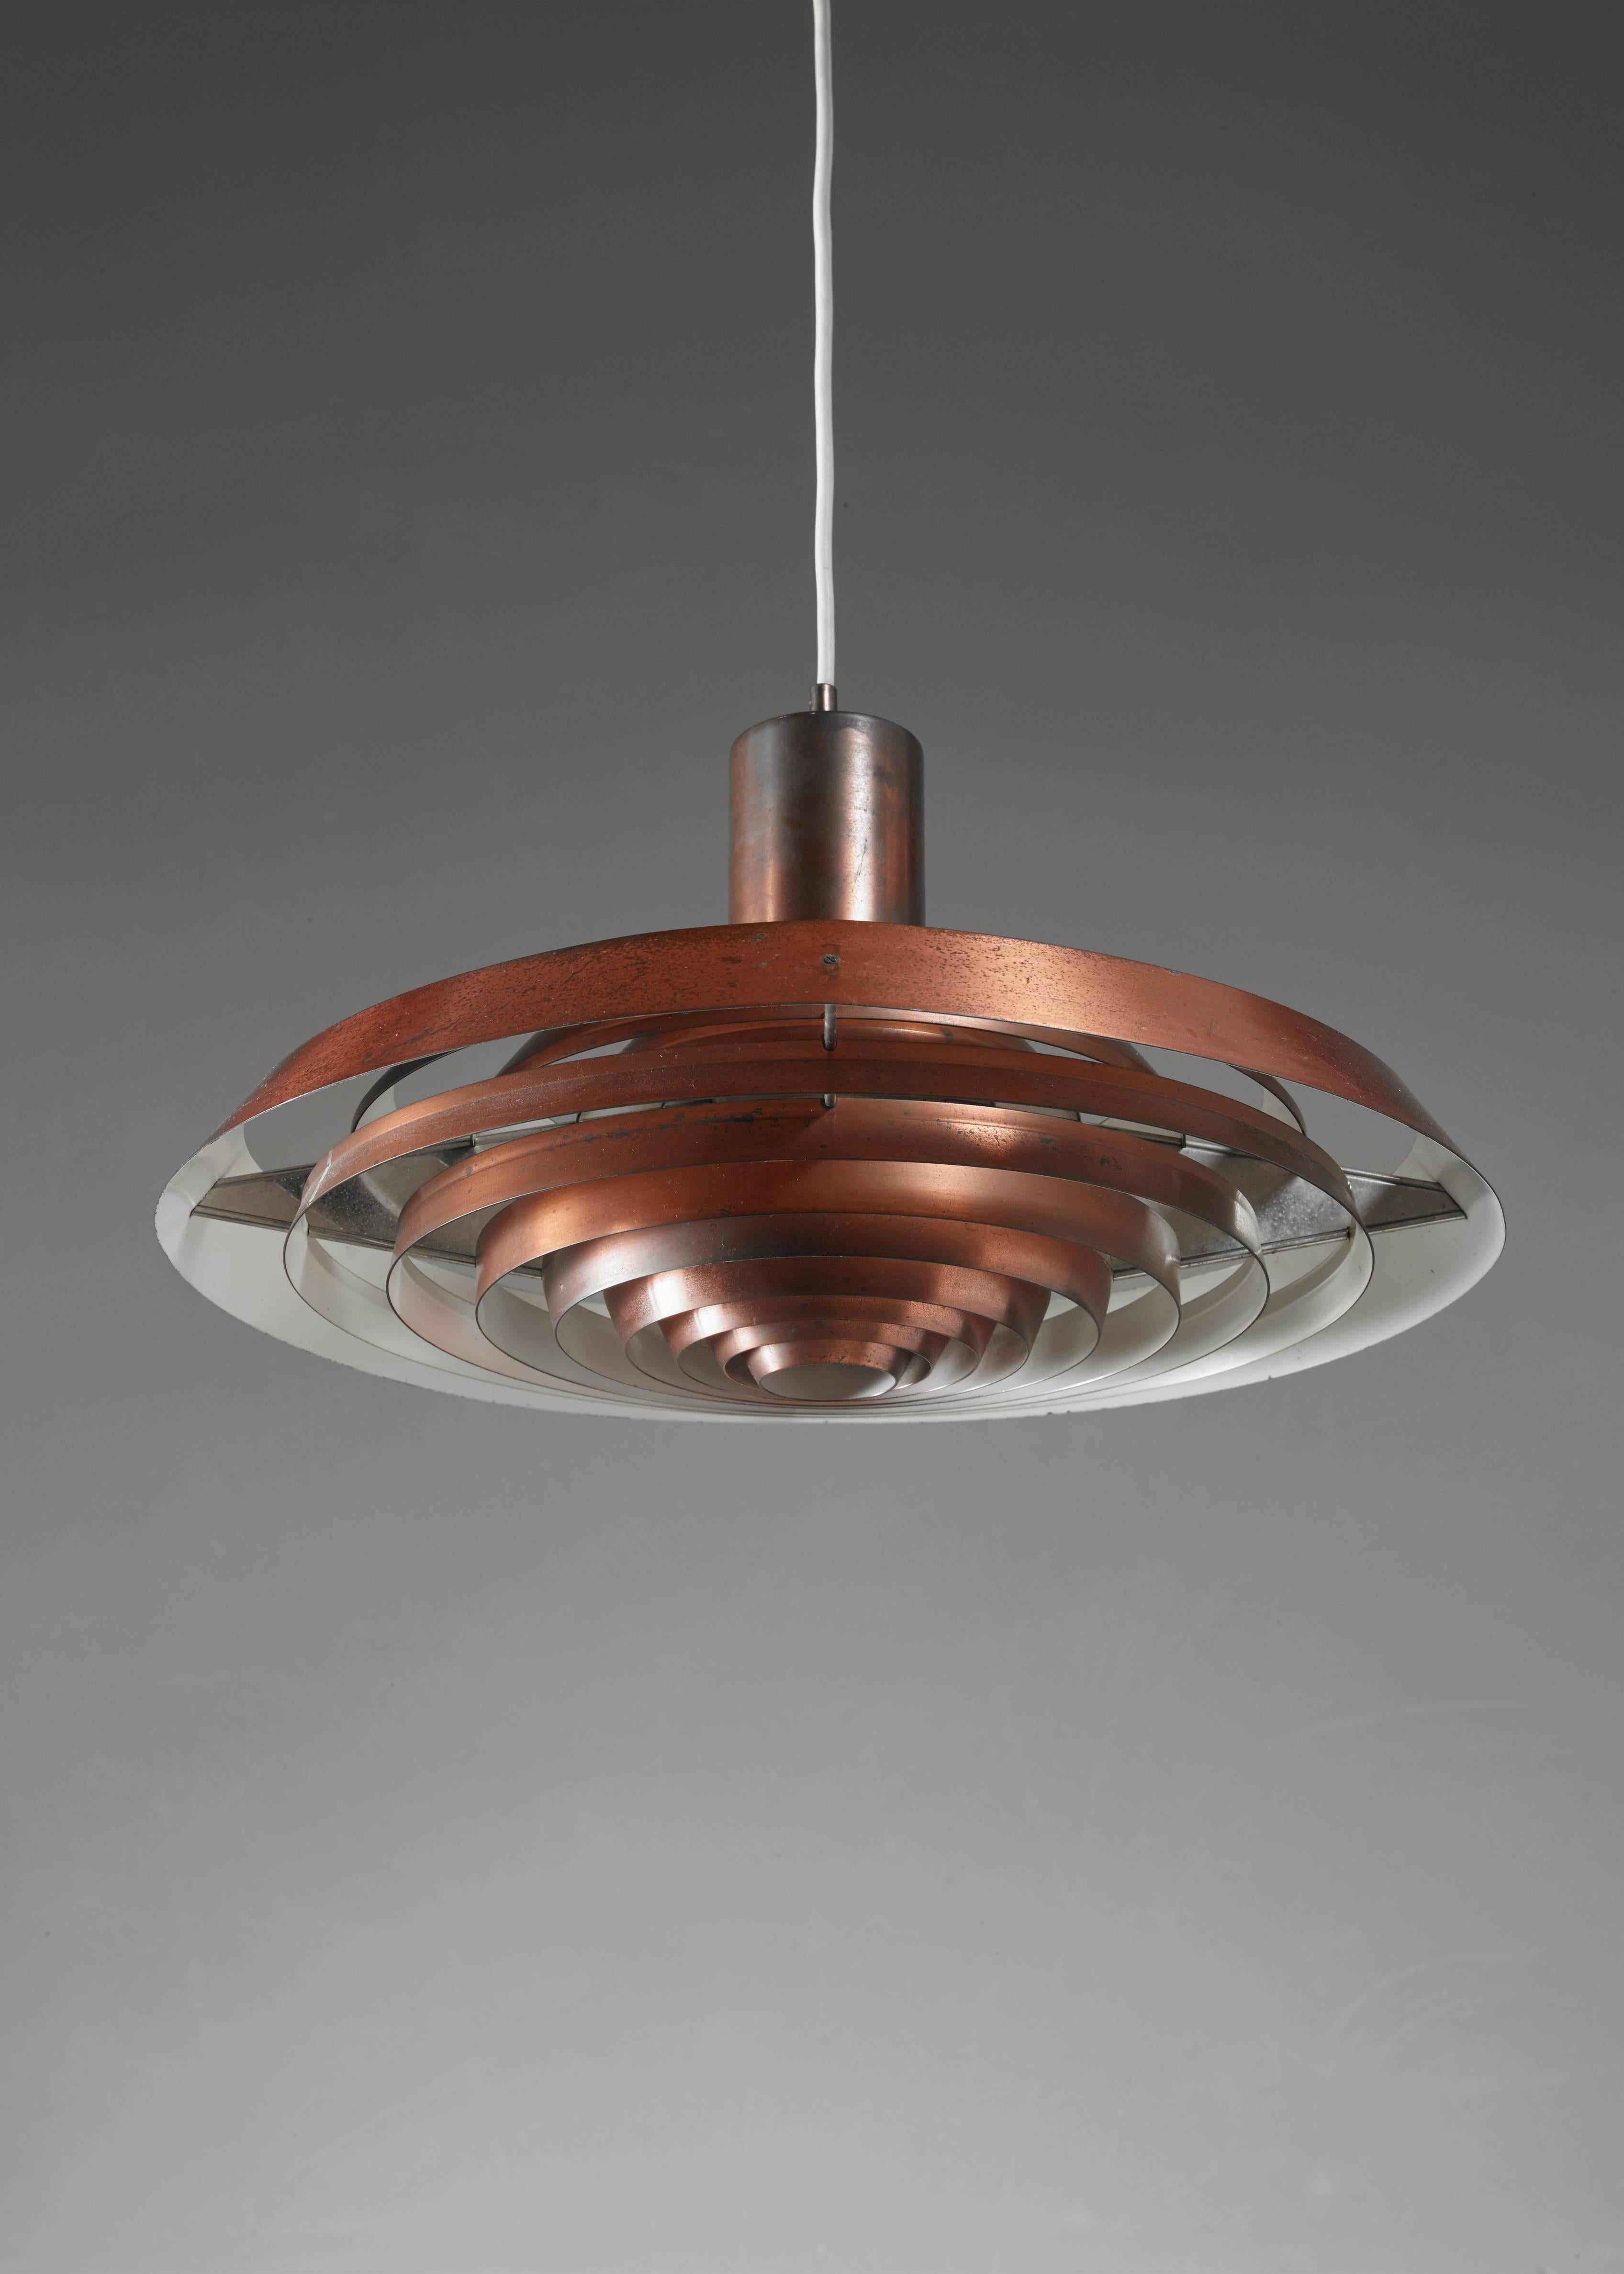 A model 'Tallerken' ('Plate') pendant for Louis Poulsen, Denmark. The lamp is made of concentric circles of copper. It was designed in 1958 by Poul Henningsen for the Langelinie Pavilion in Copenhagen. 

 